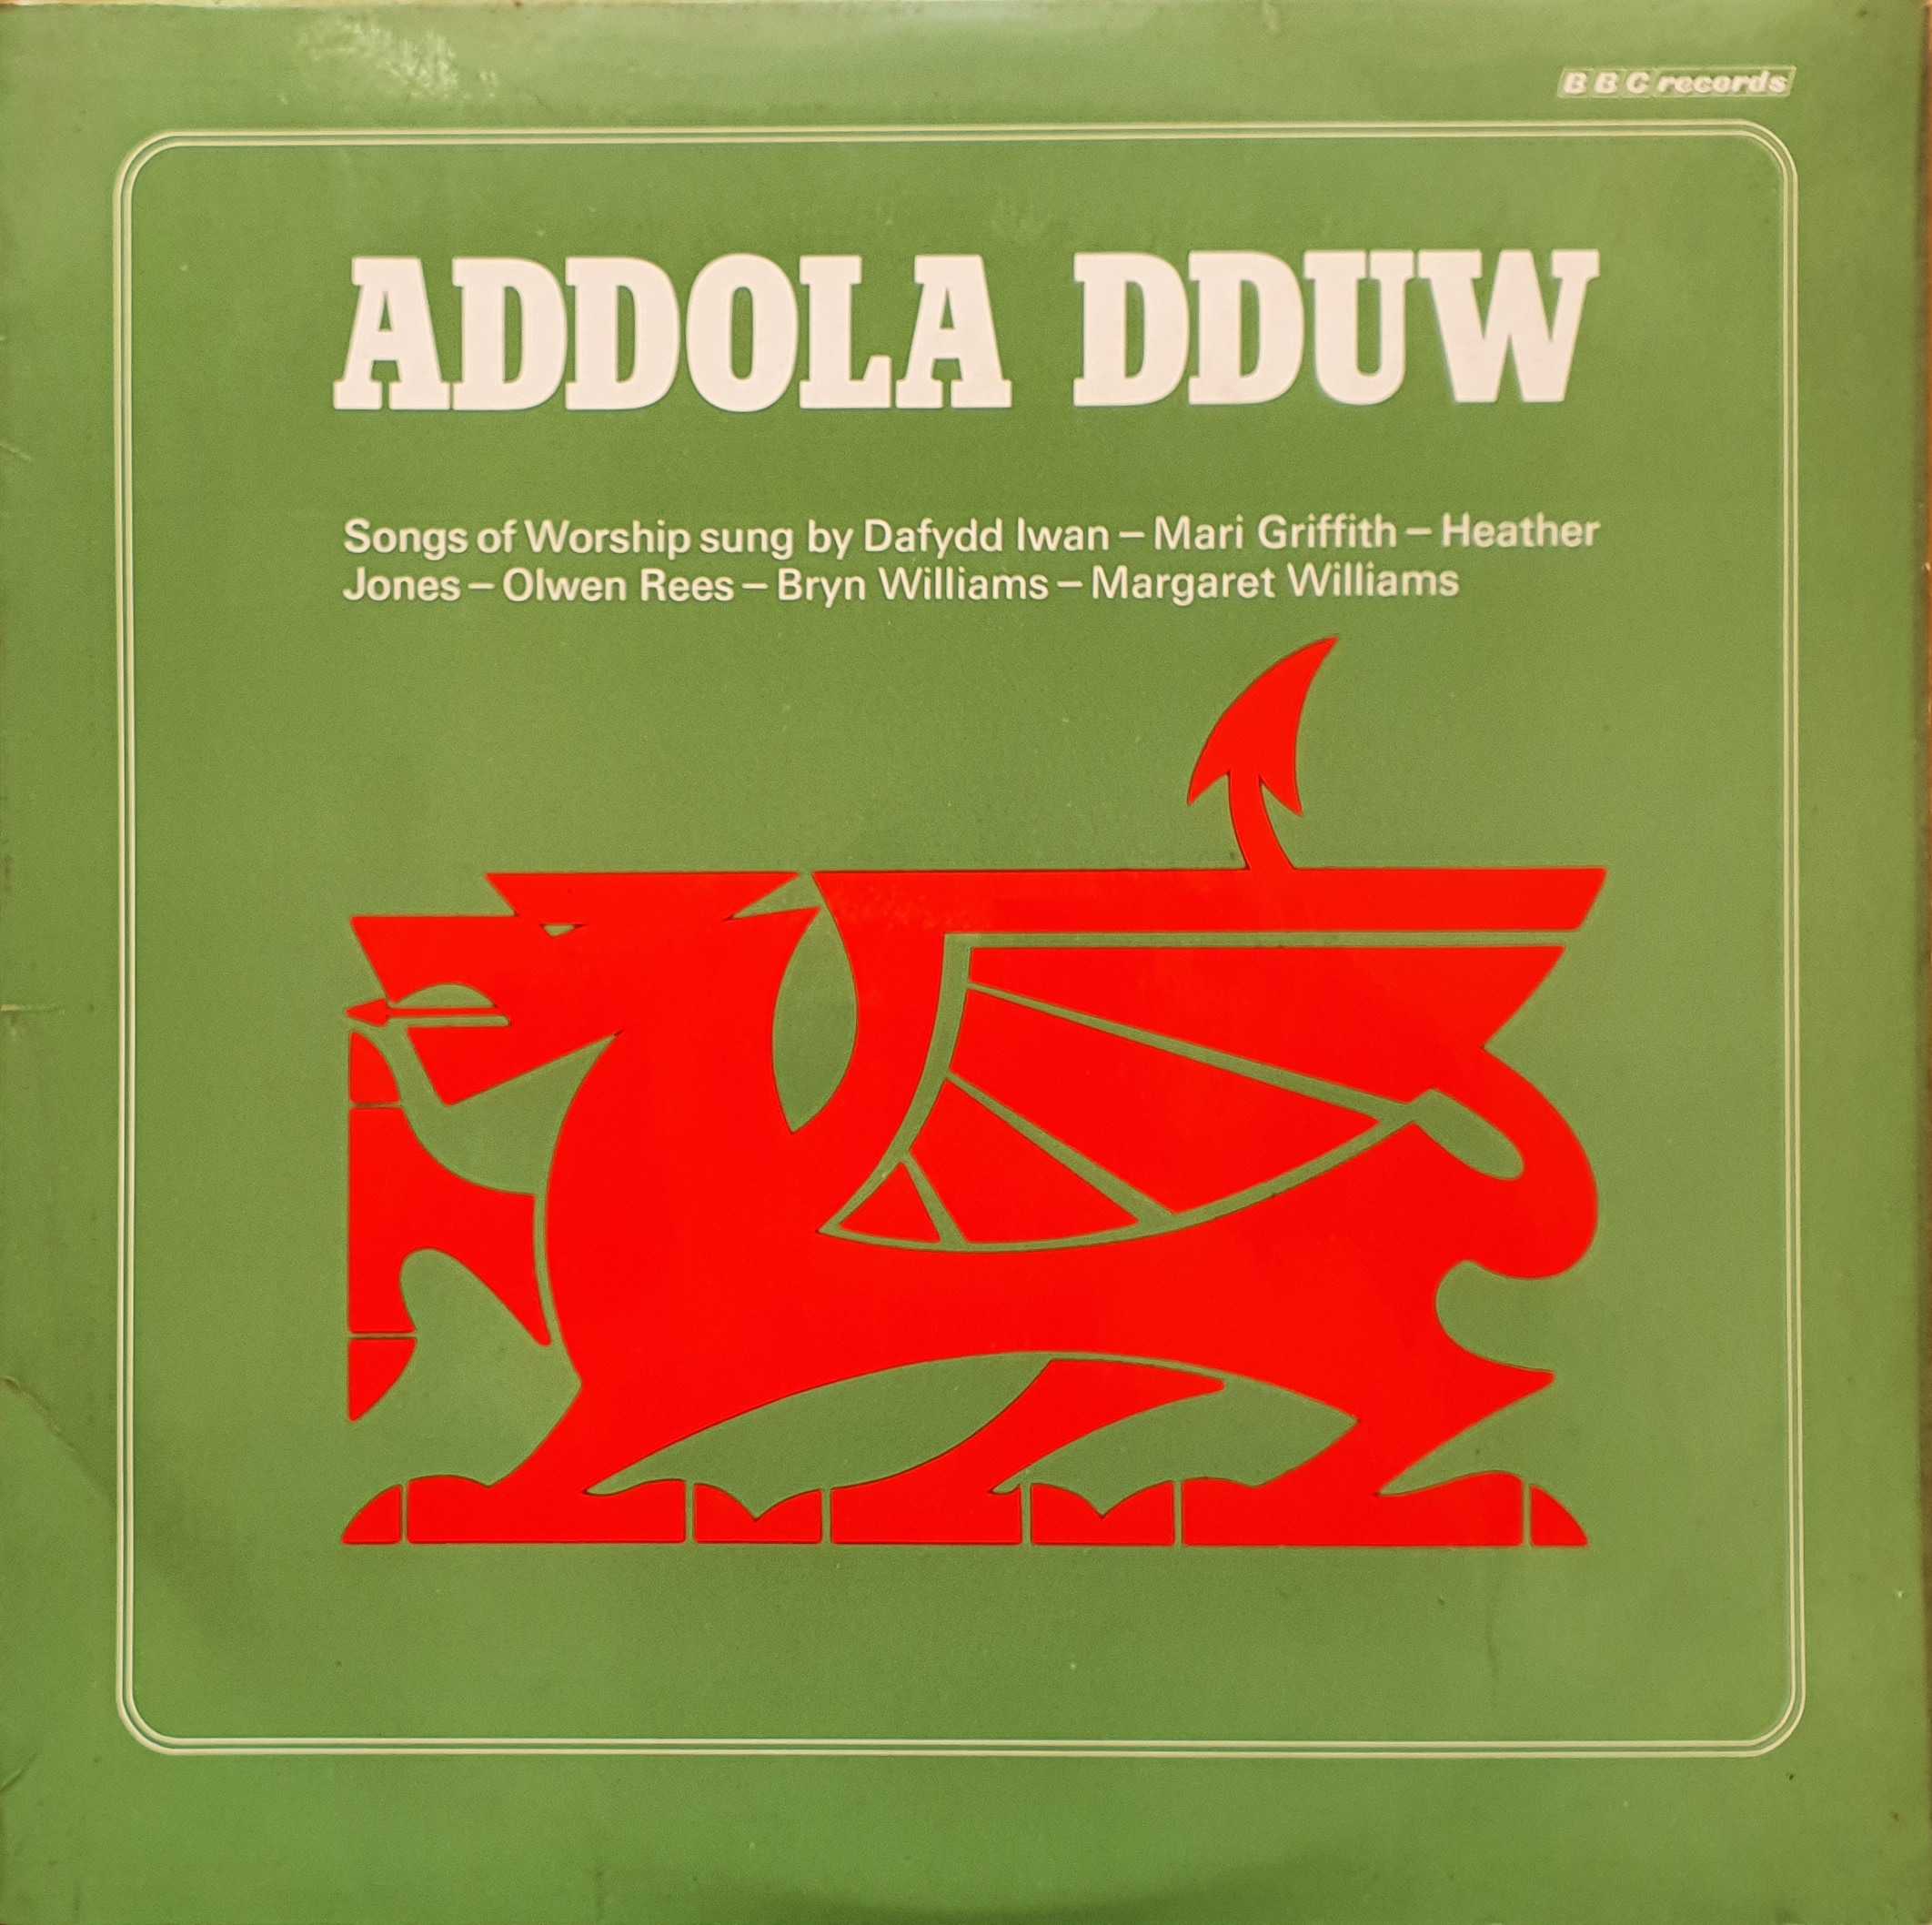 Picture of REC 64 Addola dduw by artist Various from the BBC albums - Records and Tapes library